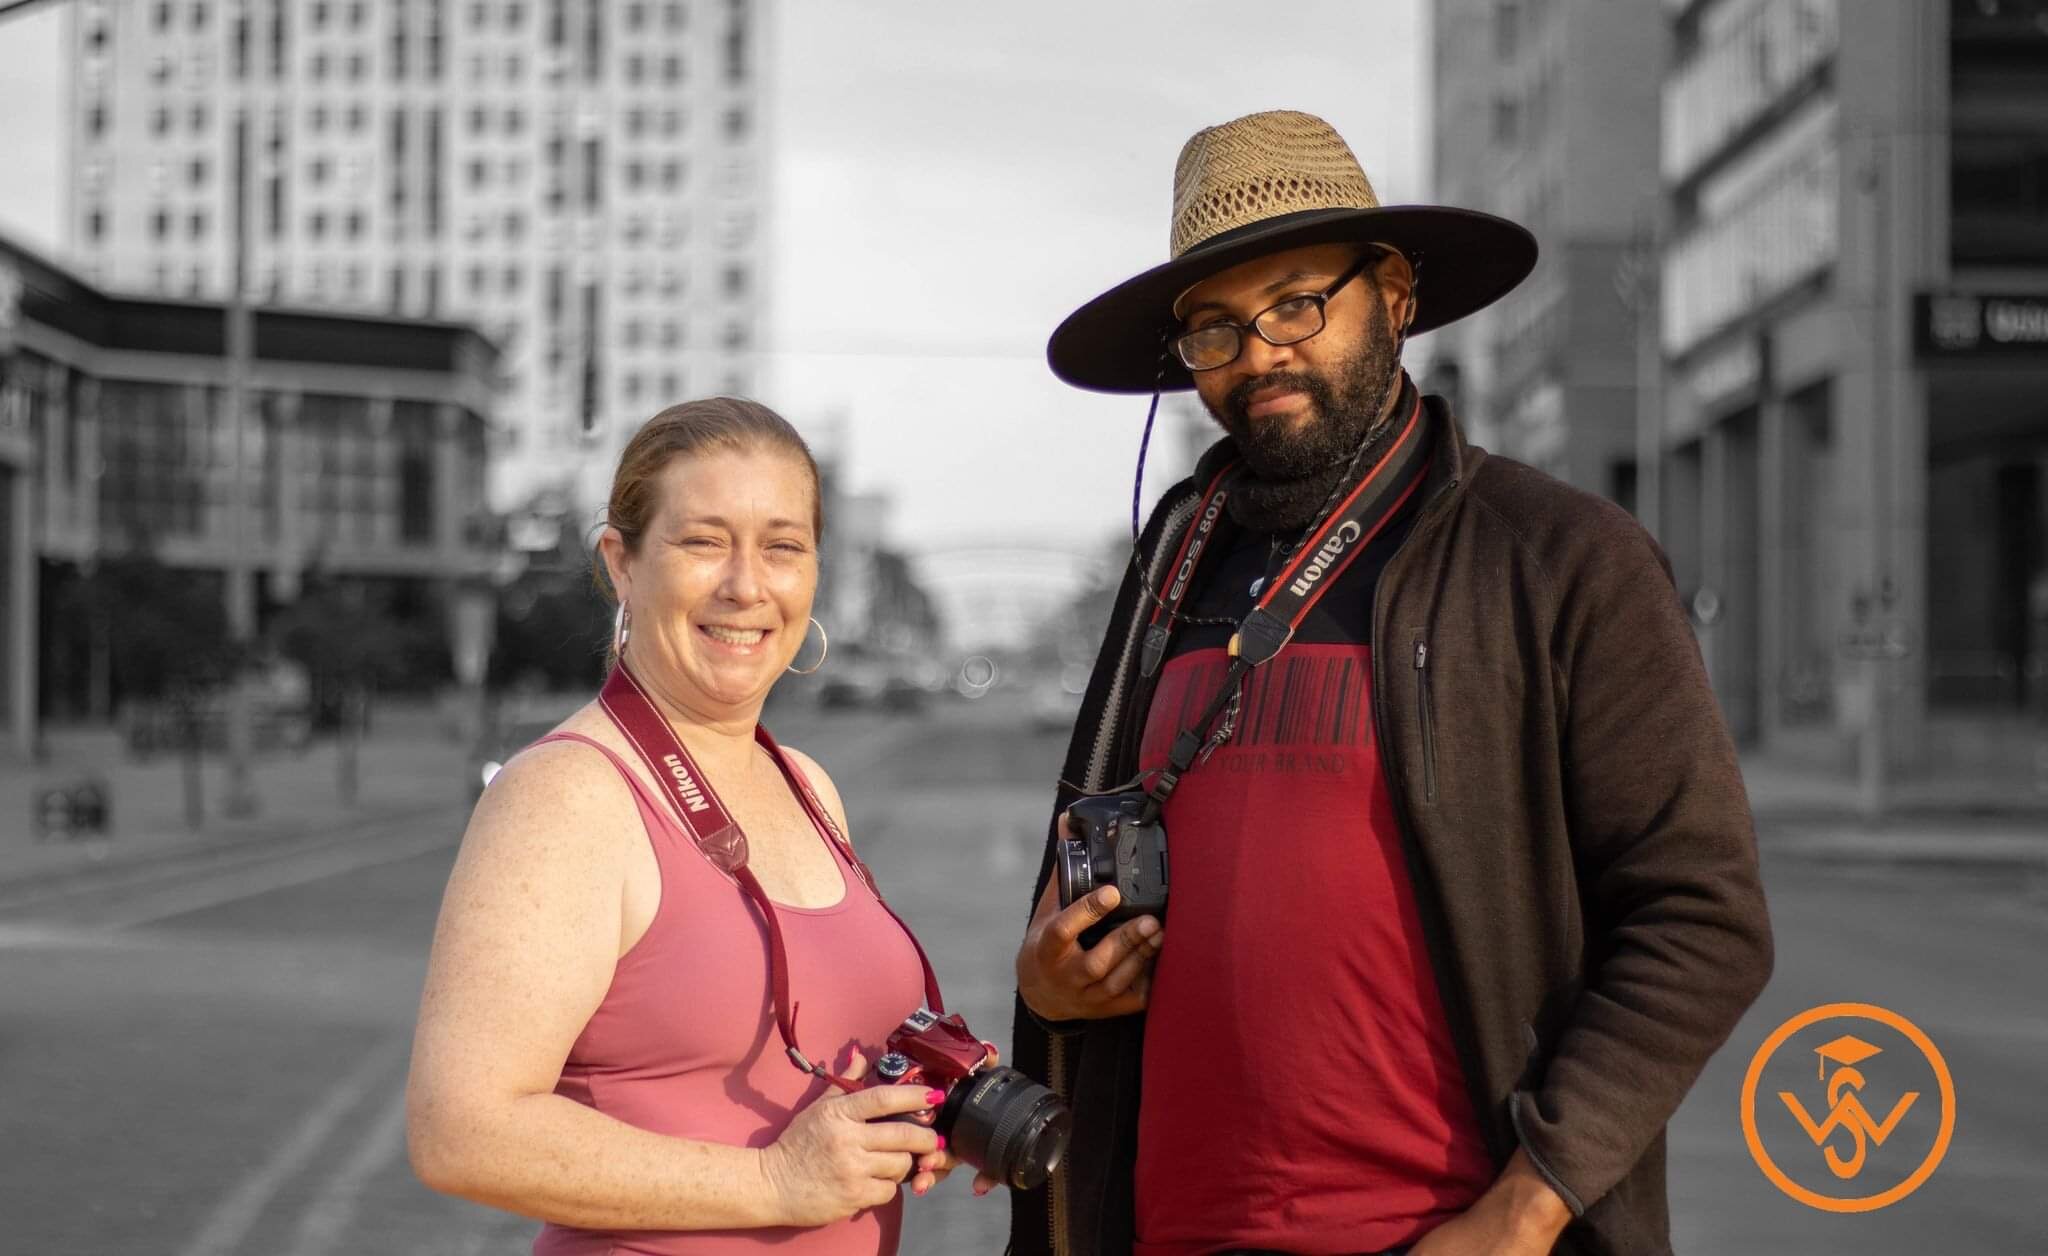  Alvin Jermaine Brown of EyeSnapStudios and Jennifer James of JJ Photography are two Flintstones on a mission. Their mission is to foster community and recognize the incredible resiliency and tenacity of Flint’s next generation of leaders.